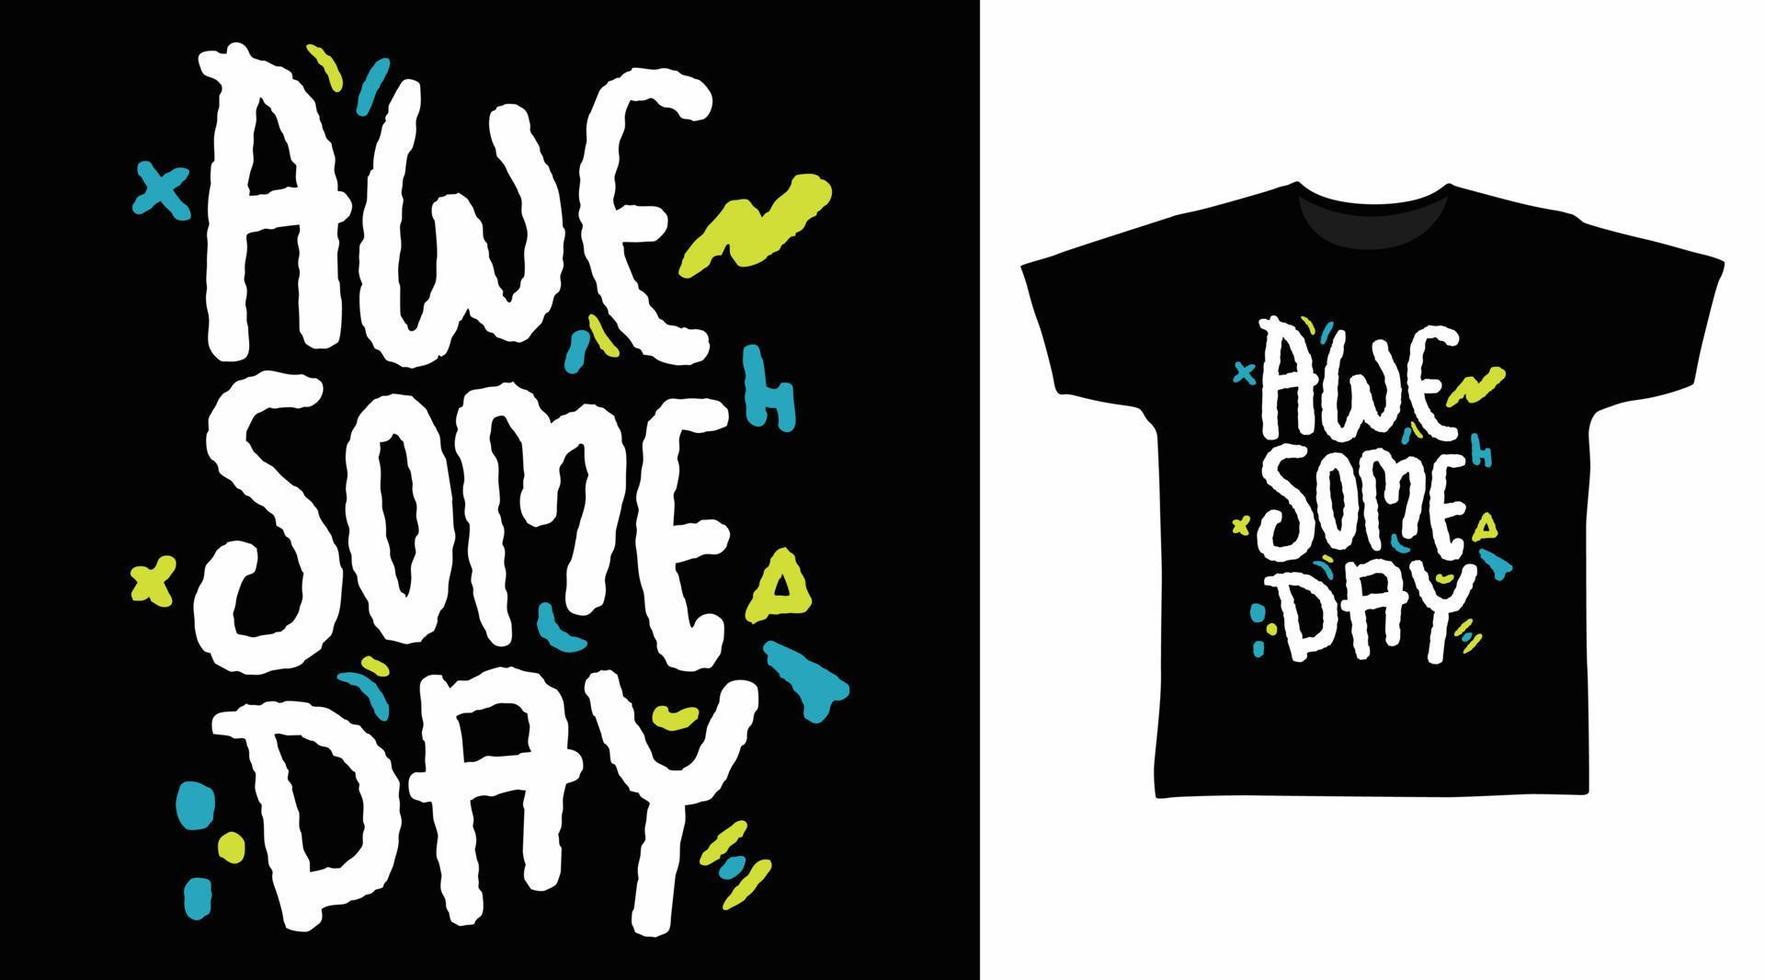 Awesome day typography design vector illustration ready for print on tees